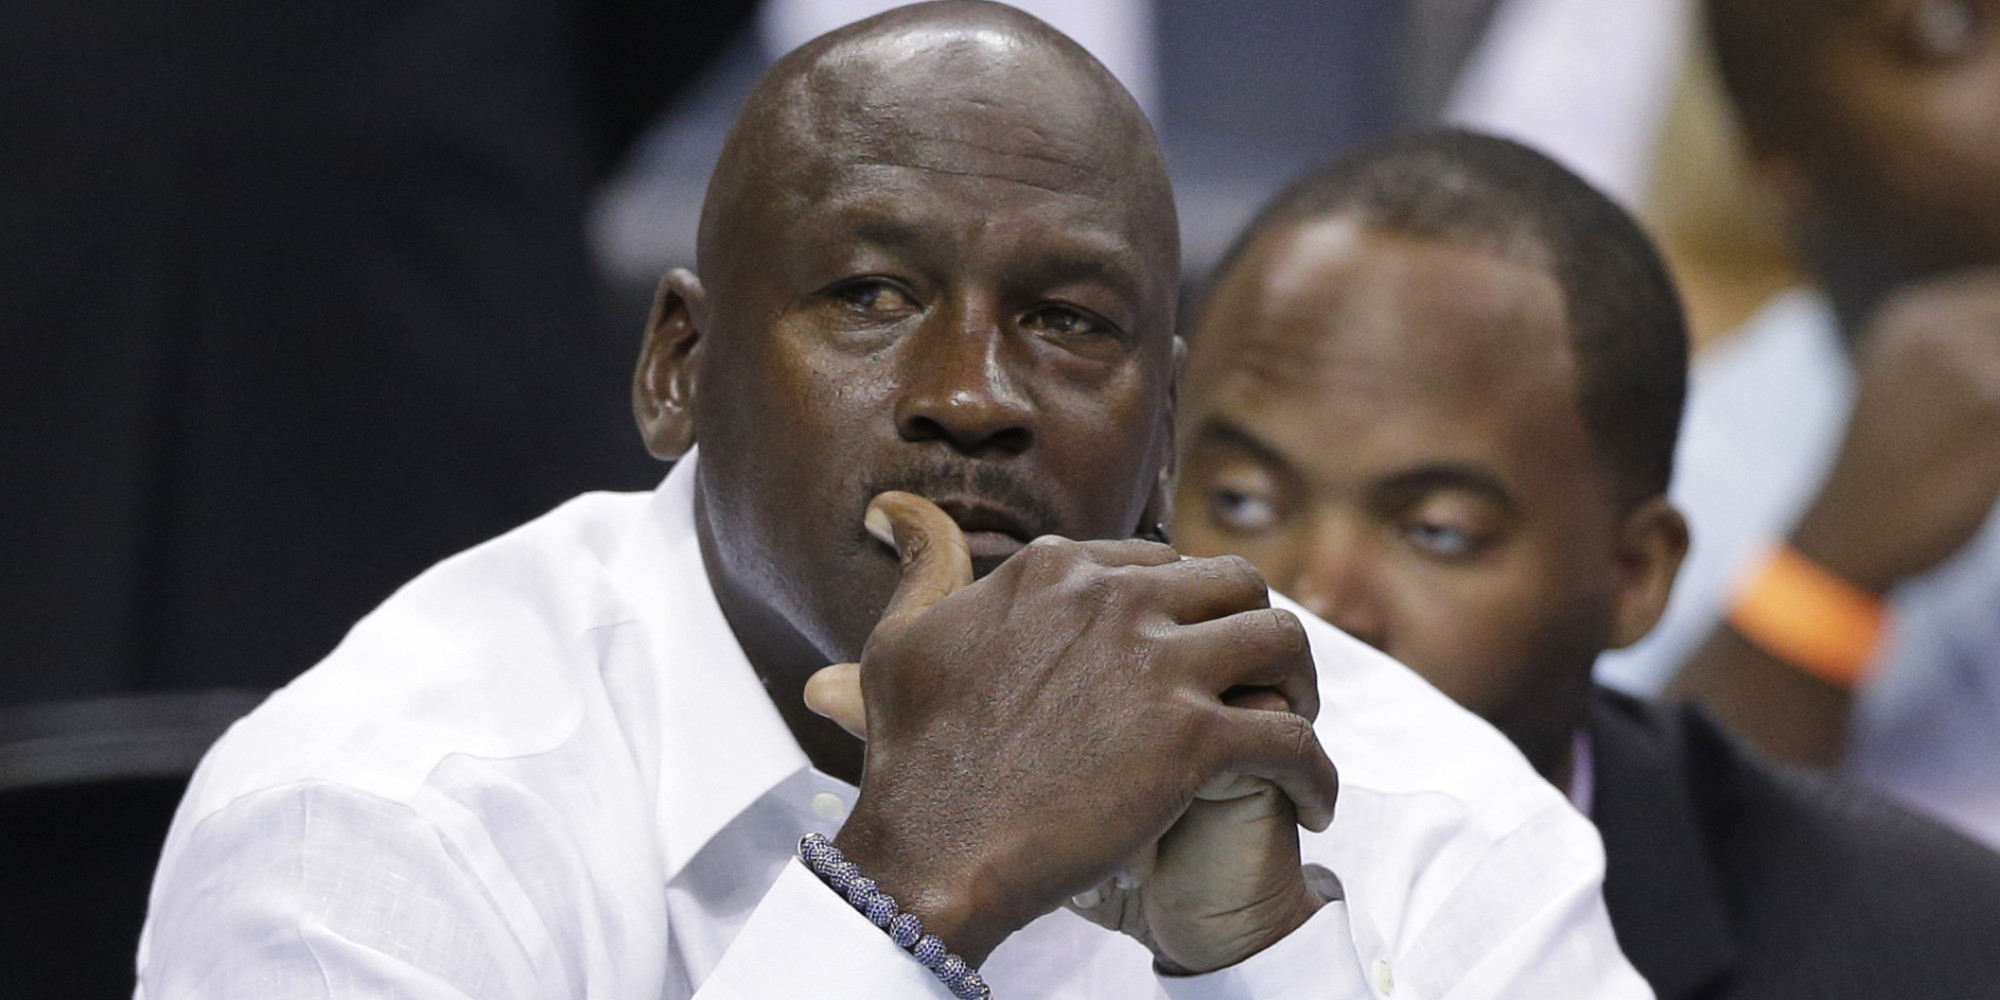 Charlotte Bobcats owner Michael Jordan watches the action during the first half in Game 3 of an opening-round NBA basketball playoff series against the Miami Heat in Charlotte, N.C., Saturday, April 26, 2014. (AP Photo/Chuck Burton)